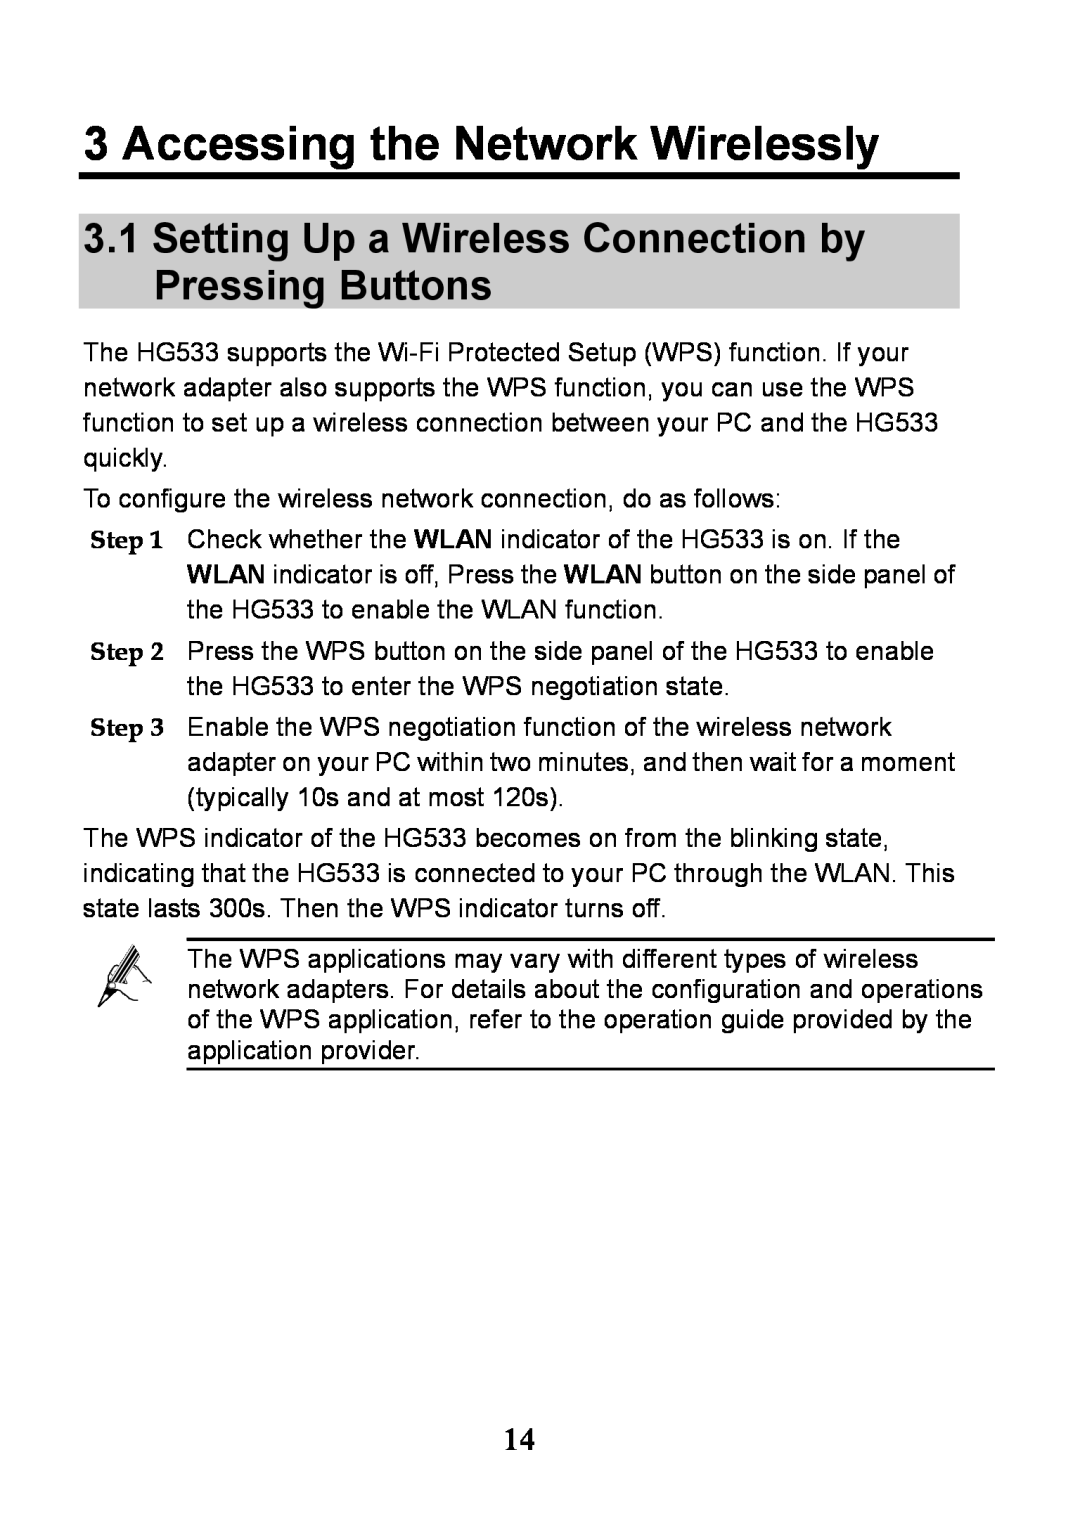 Huawei V100R001 manual Accessing the Network Wirelessly, Setting Up a Wireless Connection by Pressing Buttons 